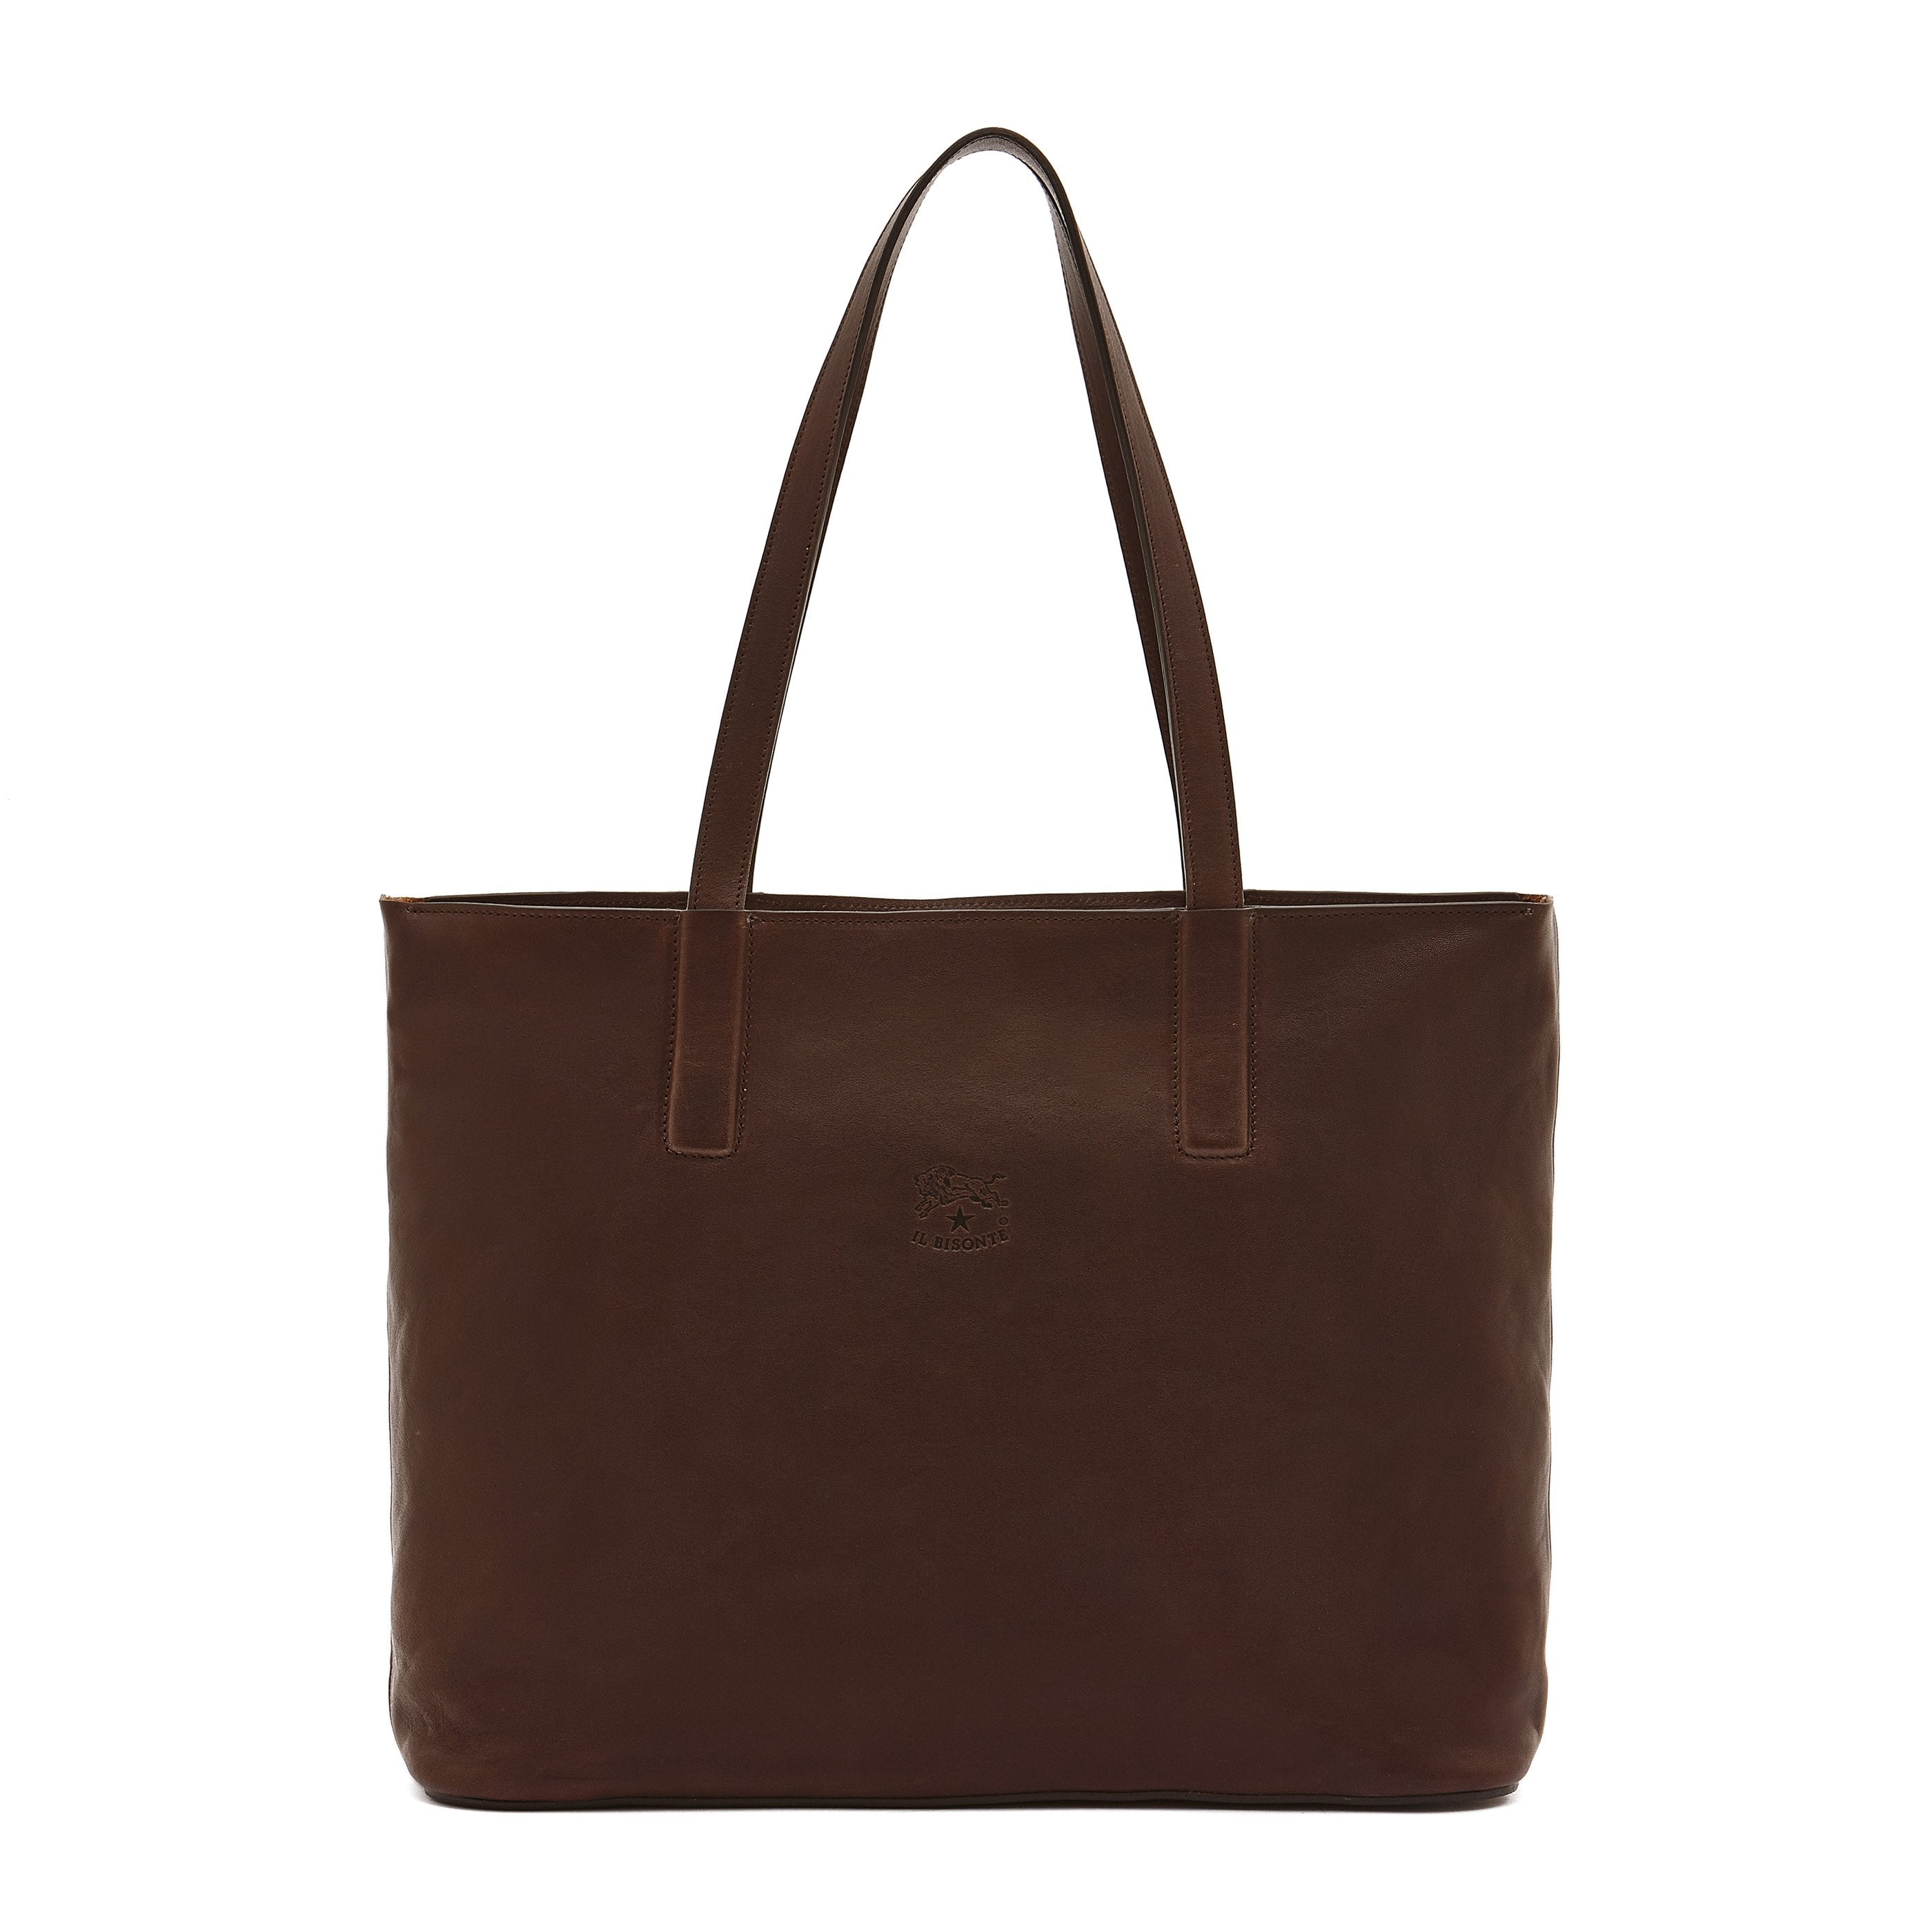 New icon | Women's tote bag in vintage leather color coffee